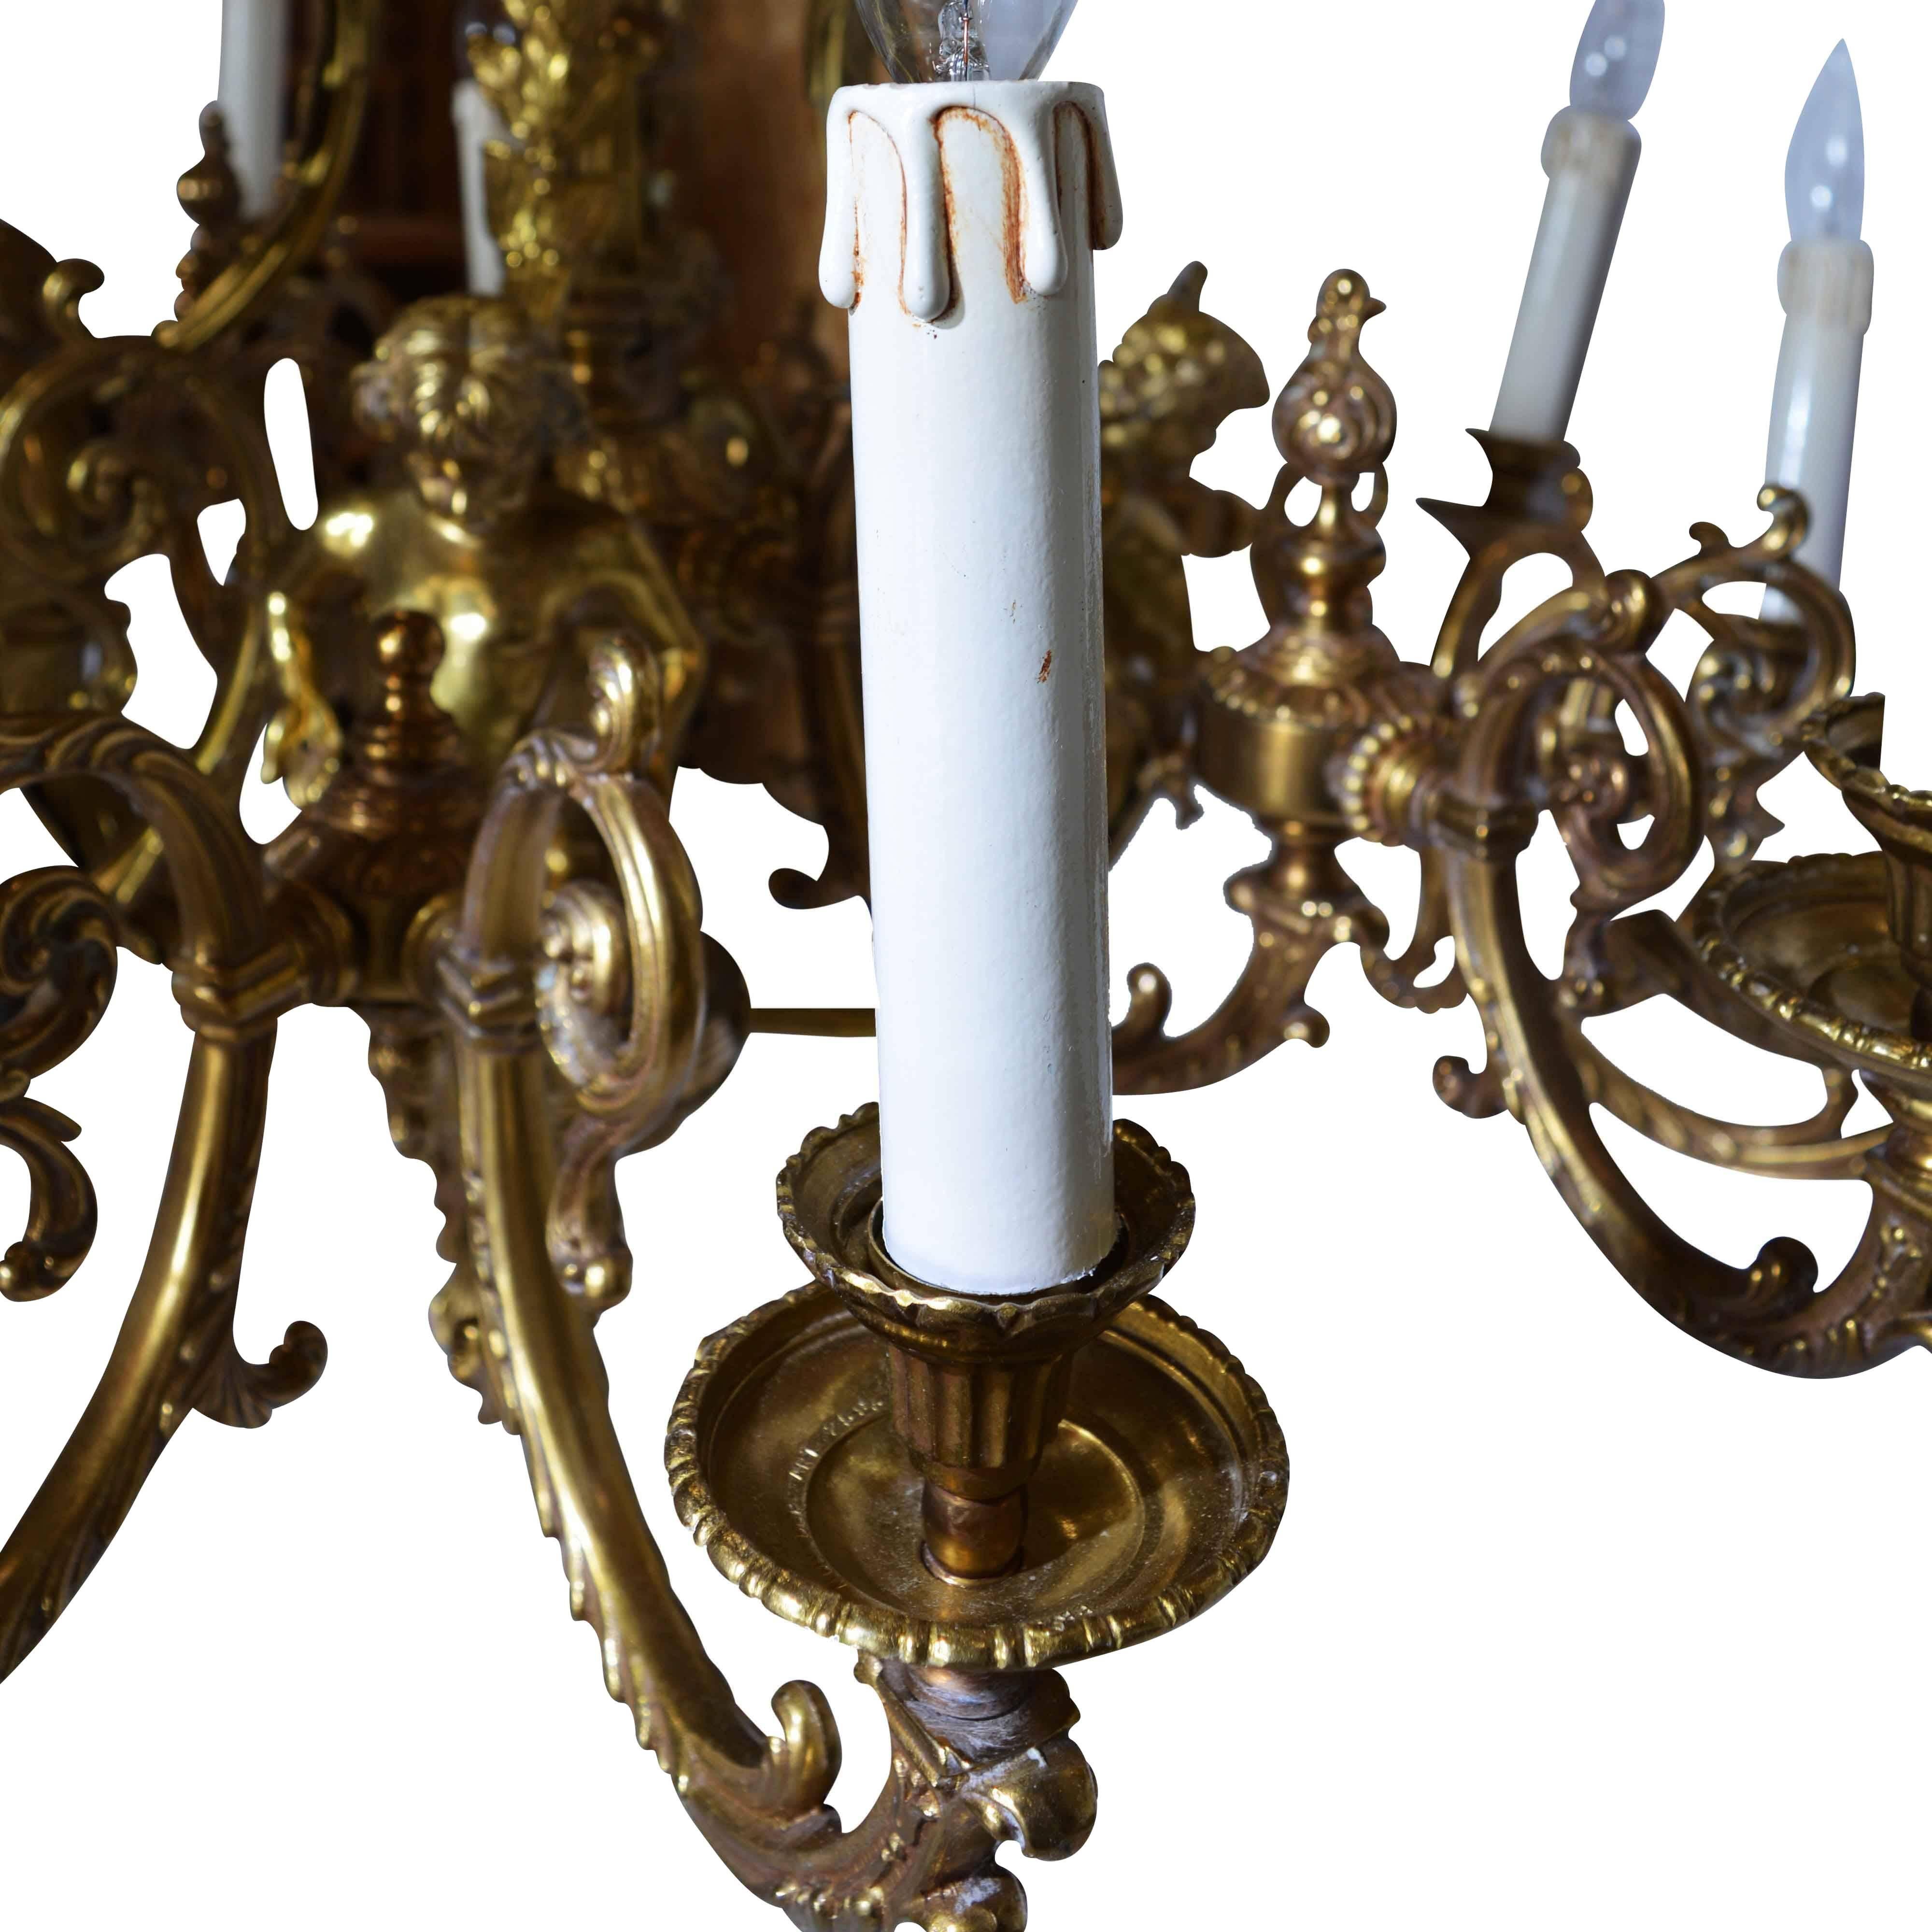 There is just something about the cherubs that adorn the arms of this bronze chandelier that is sure to bring a warm glow to any room. The centre column is marked with the Italian manufacturer’s mark – FBAI. They create amazing lights and this one